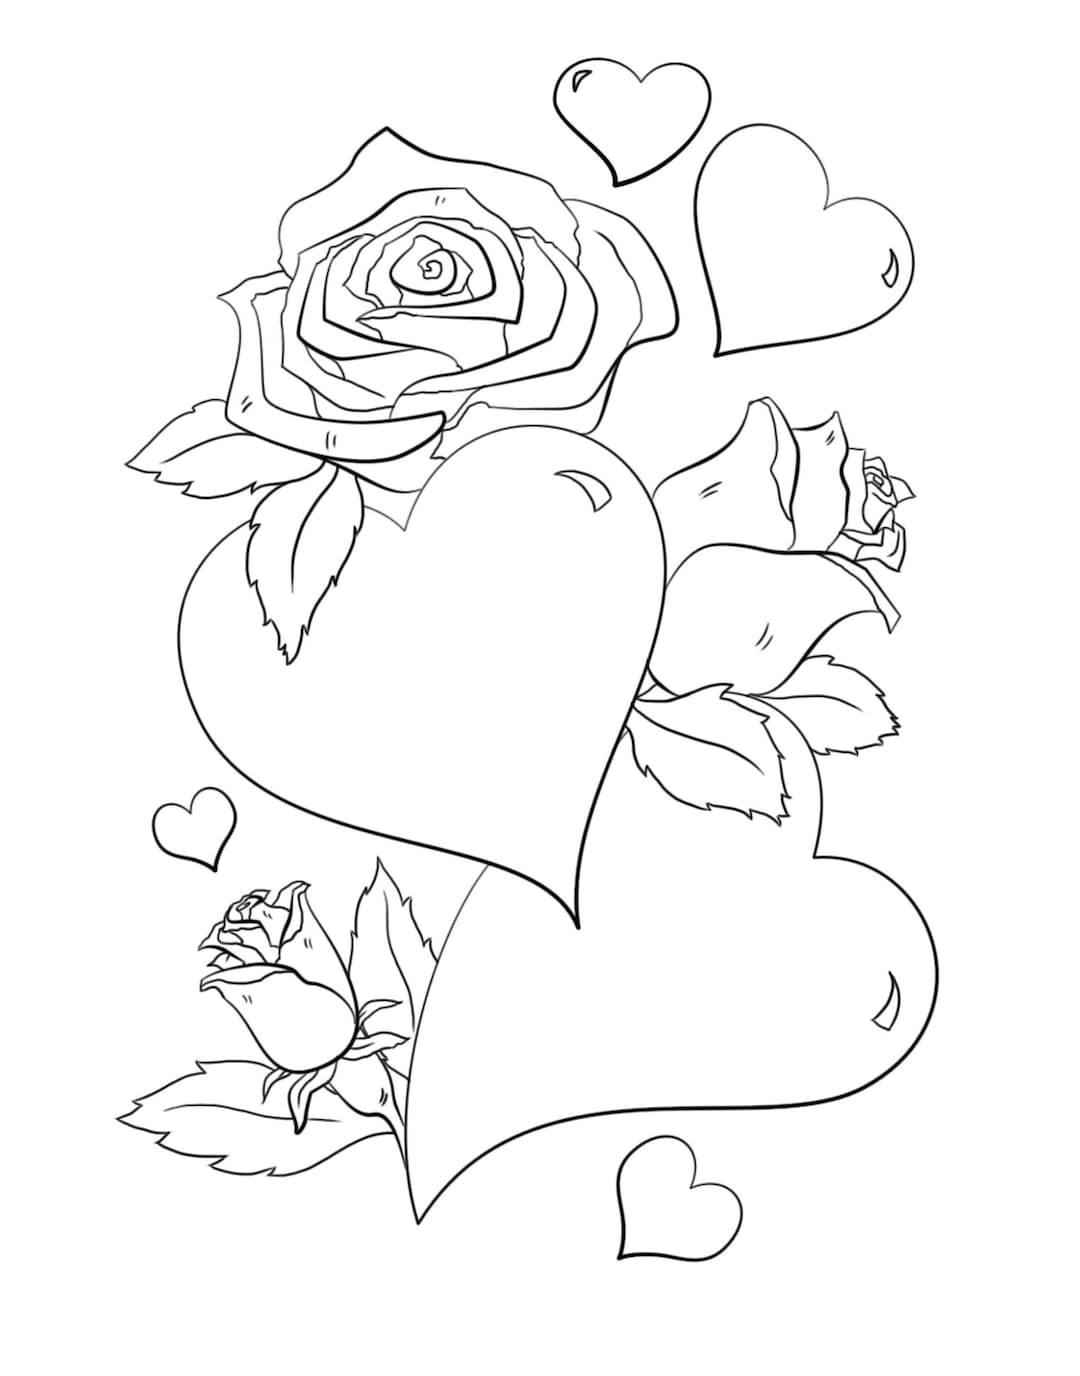 Hearts and roses coloring page happy valentines day valentine coloring sheet kids adult coloring valentines printable love heart rose instant download